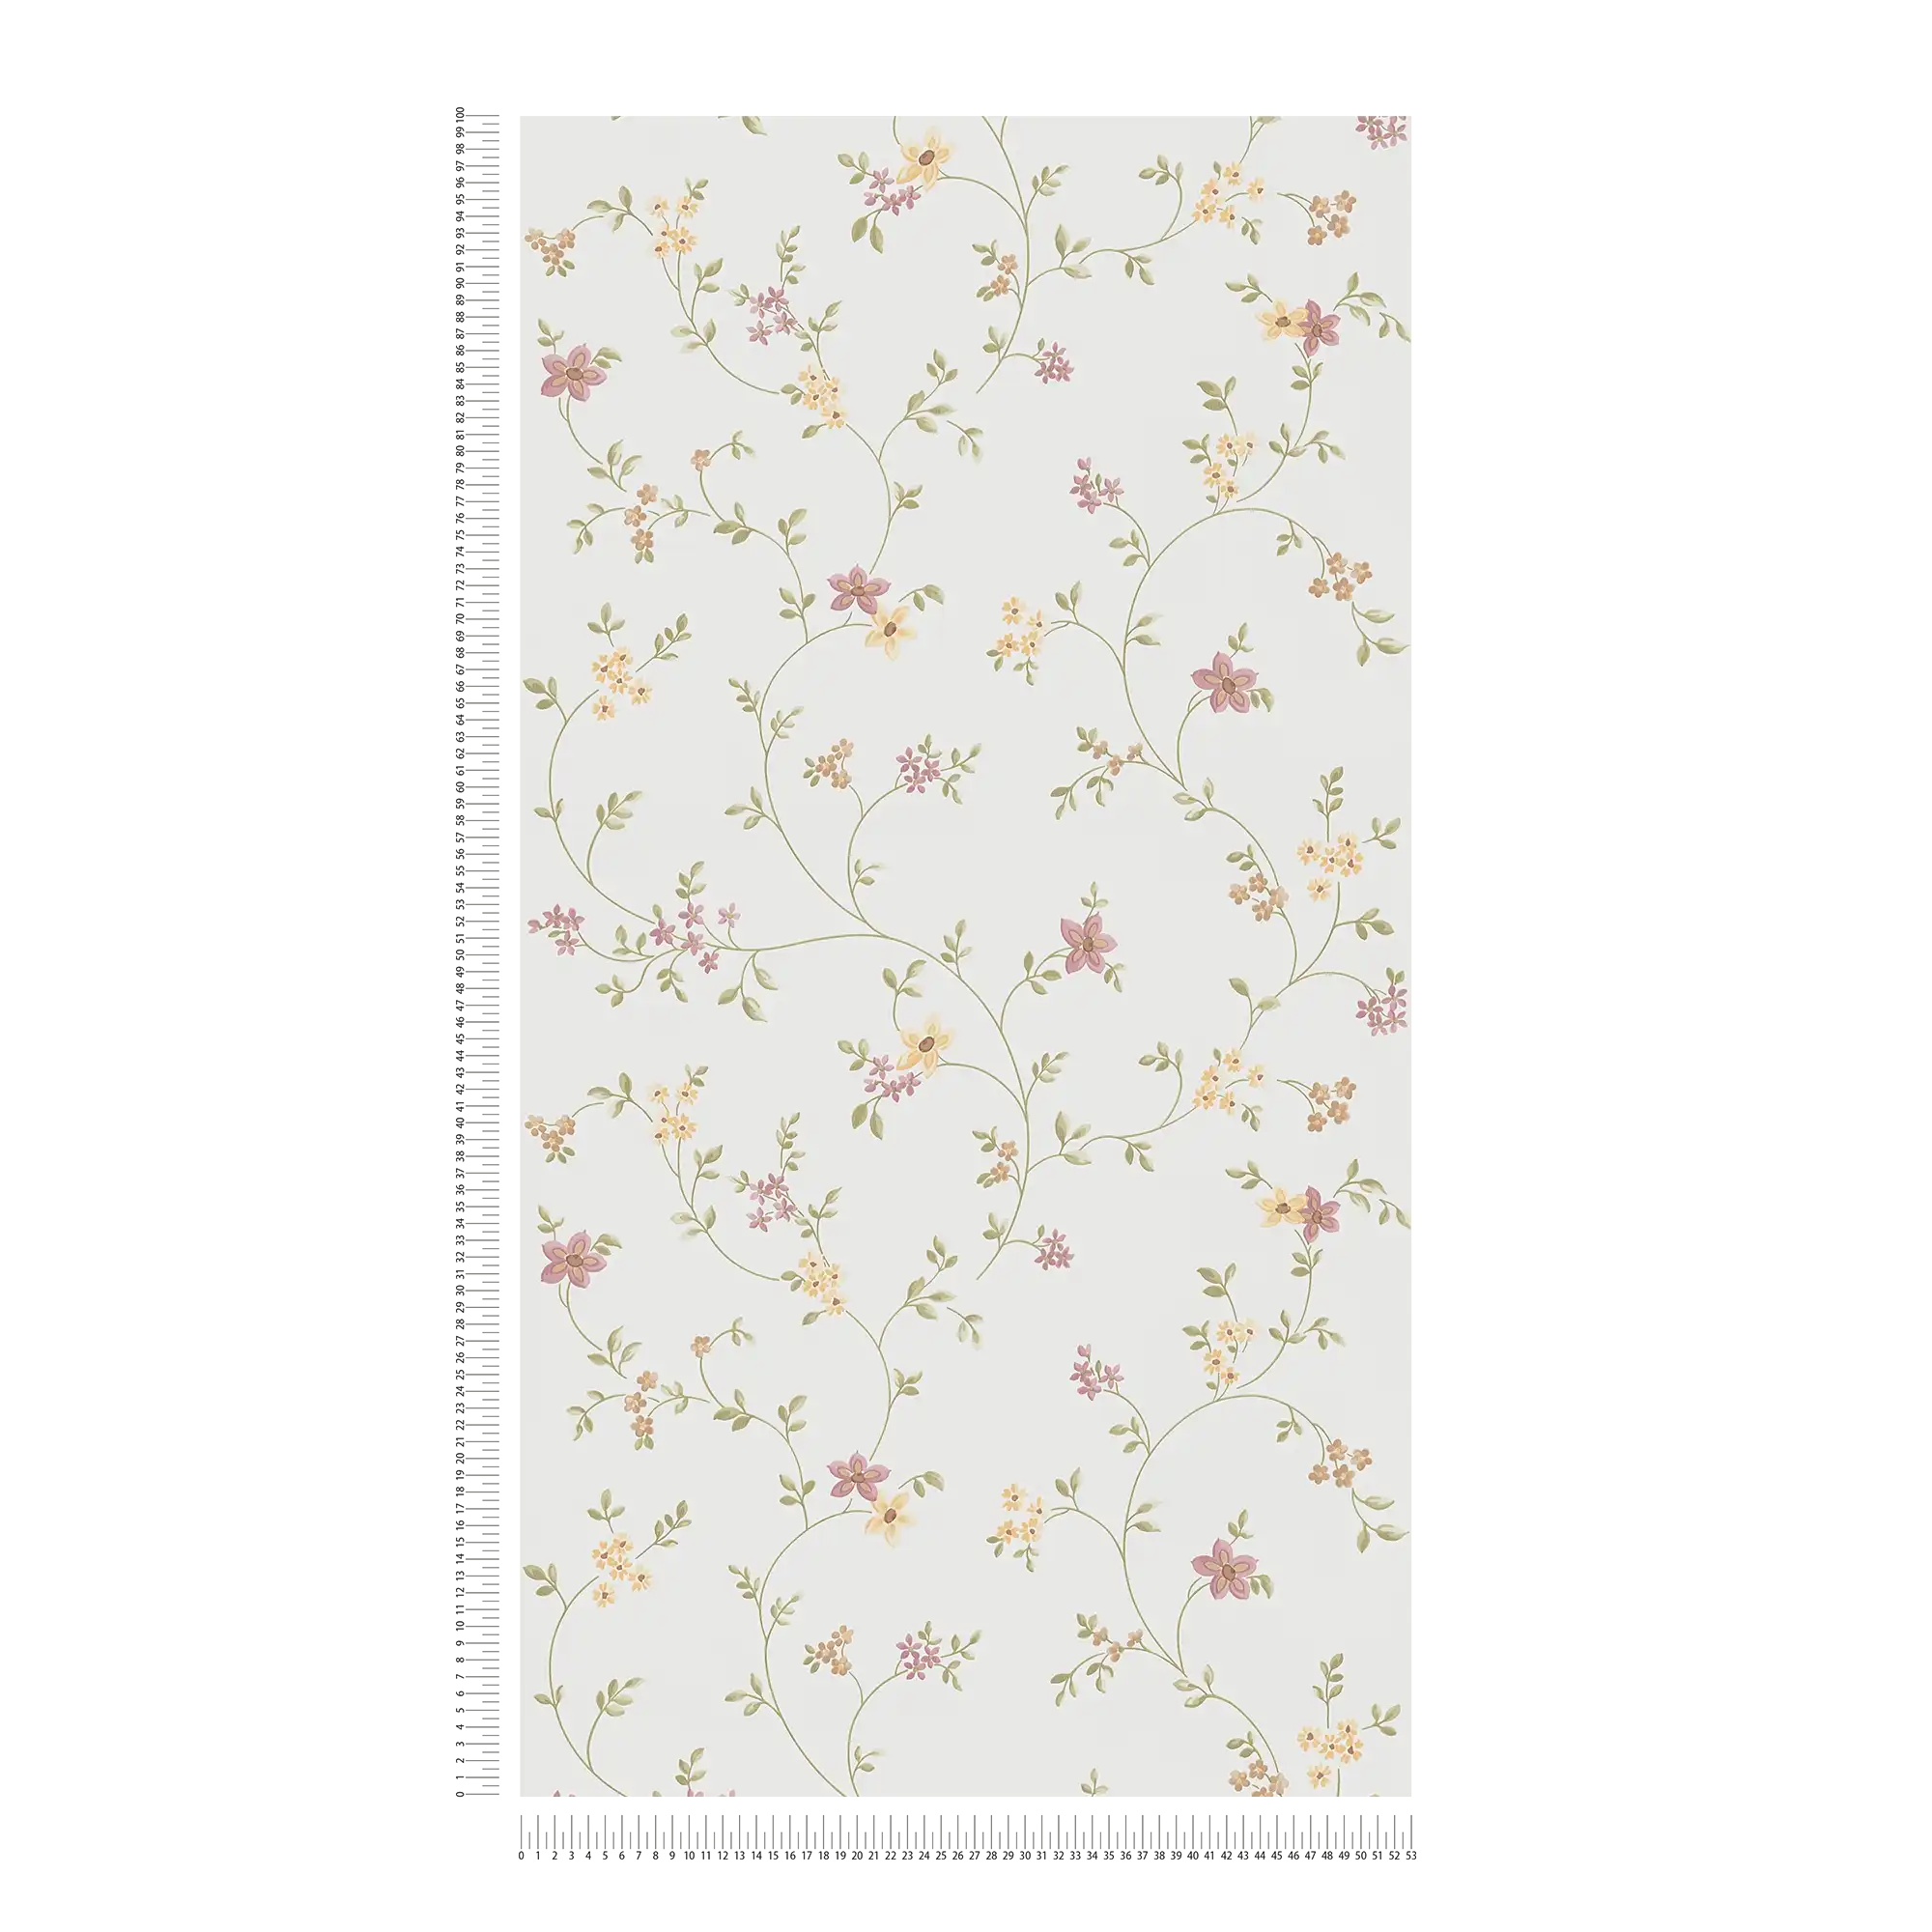             Self-adhesive wallpaper | floral pattern with subtle vines - cream, green, beige
        